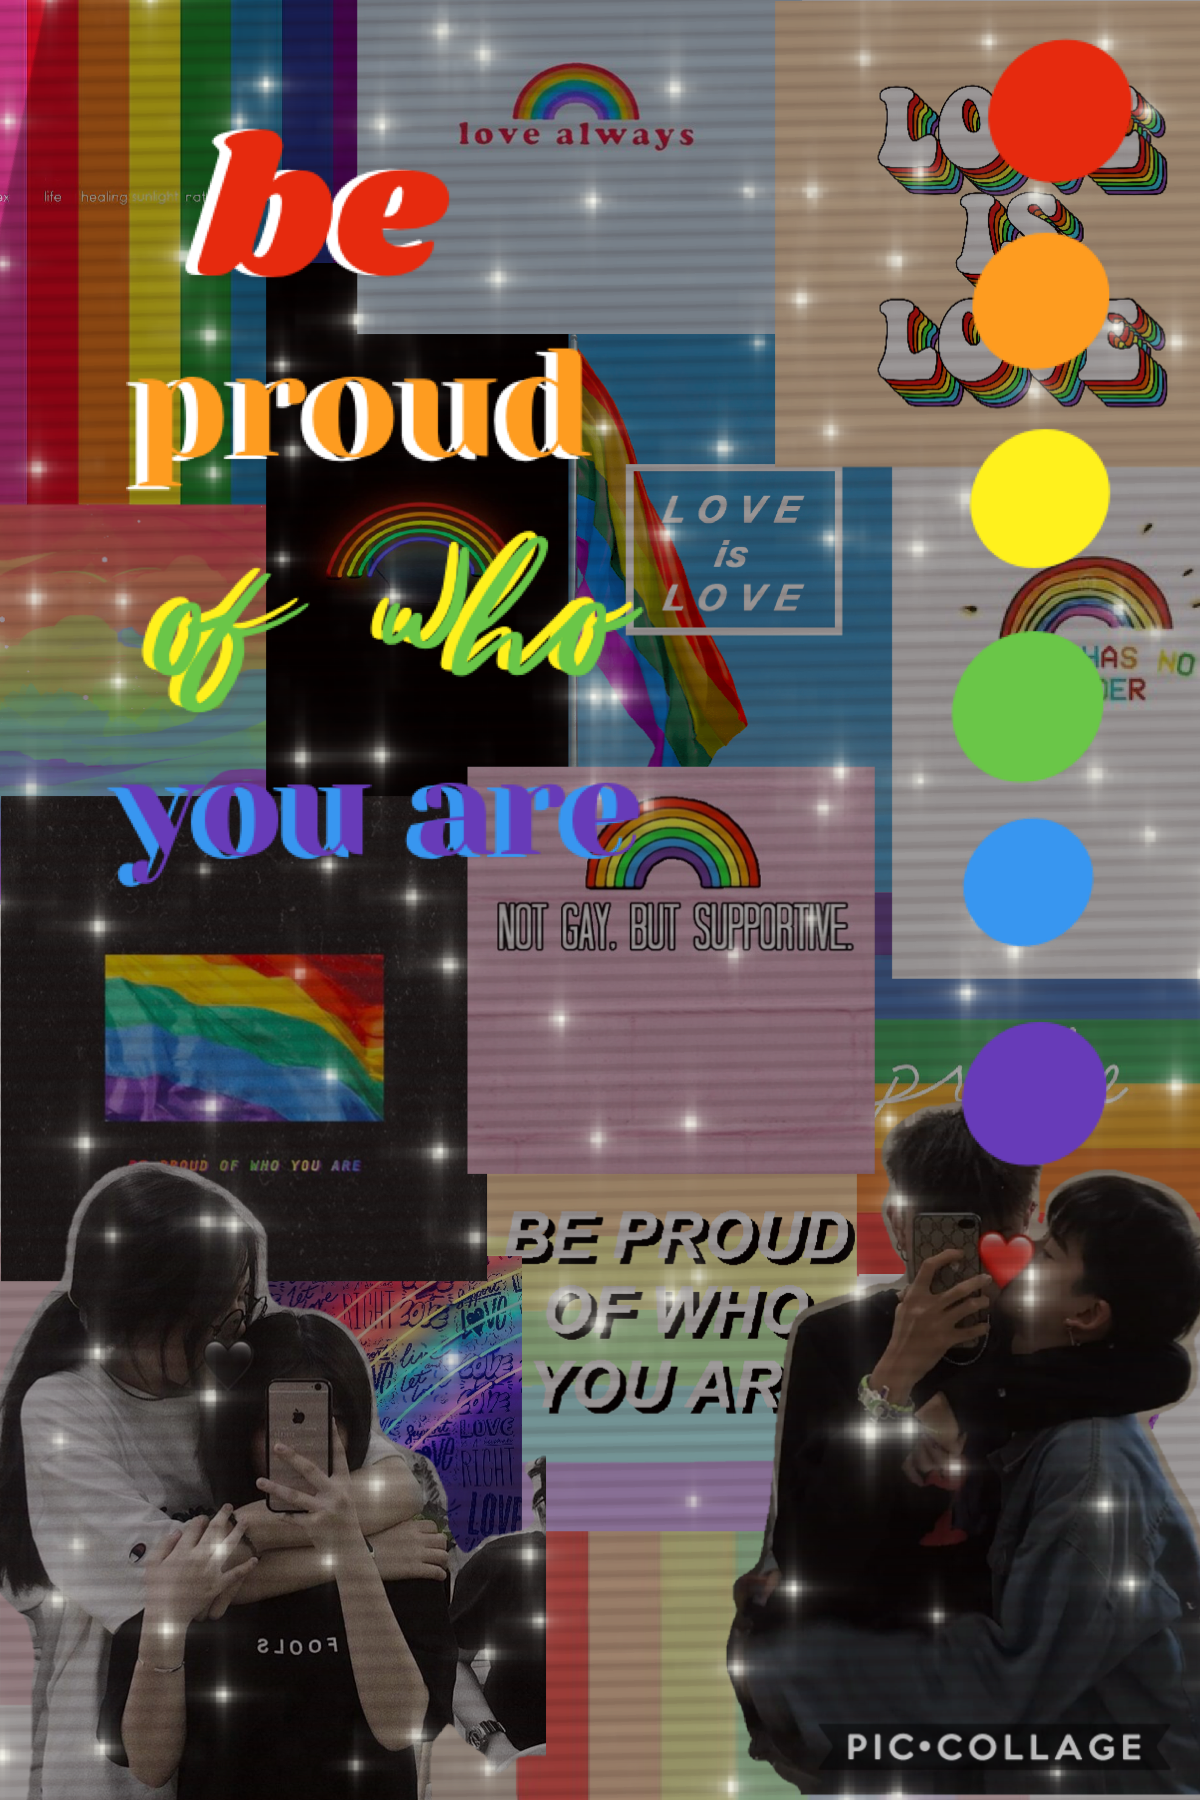 i posted a collage spreading awareness when i first came here on pc... i decided to make another one 🏳️‍🌈